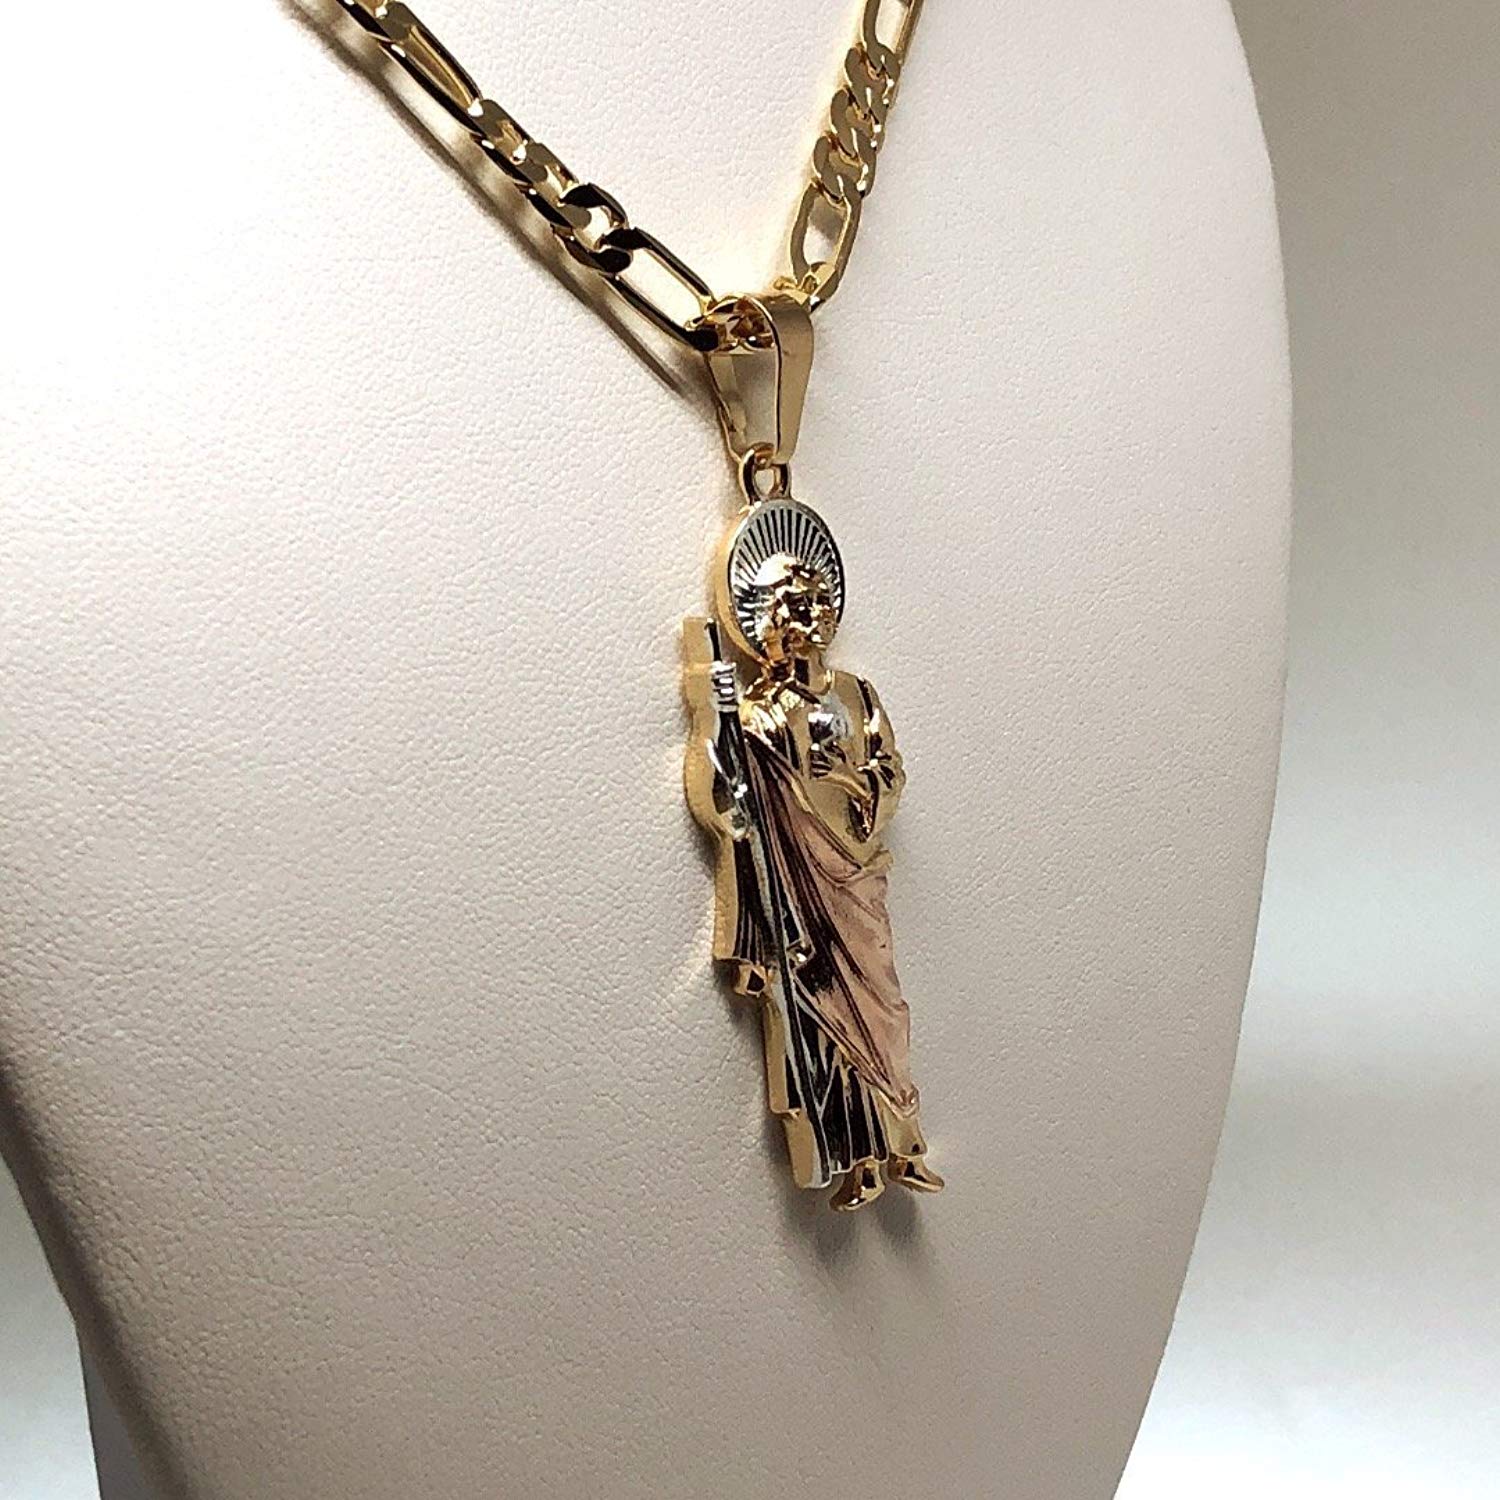 Gold Plated Saint Jude Pendant Necklace Chain San Judas Tadeo Jewelry - Fran & Co. Jewelry